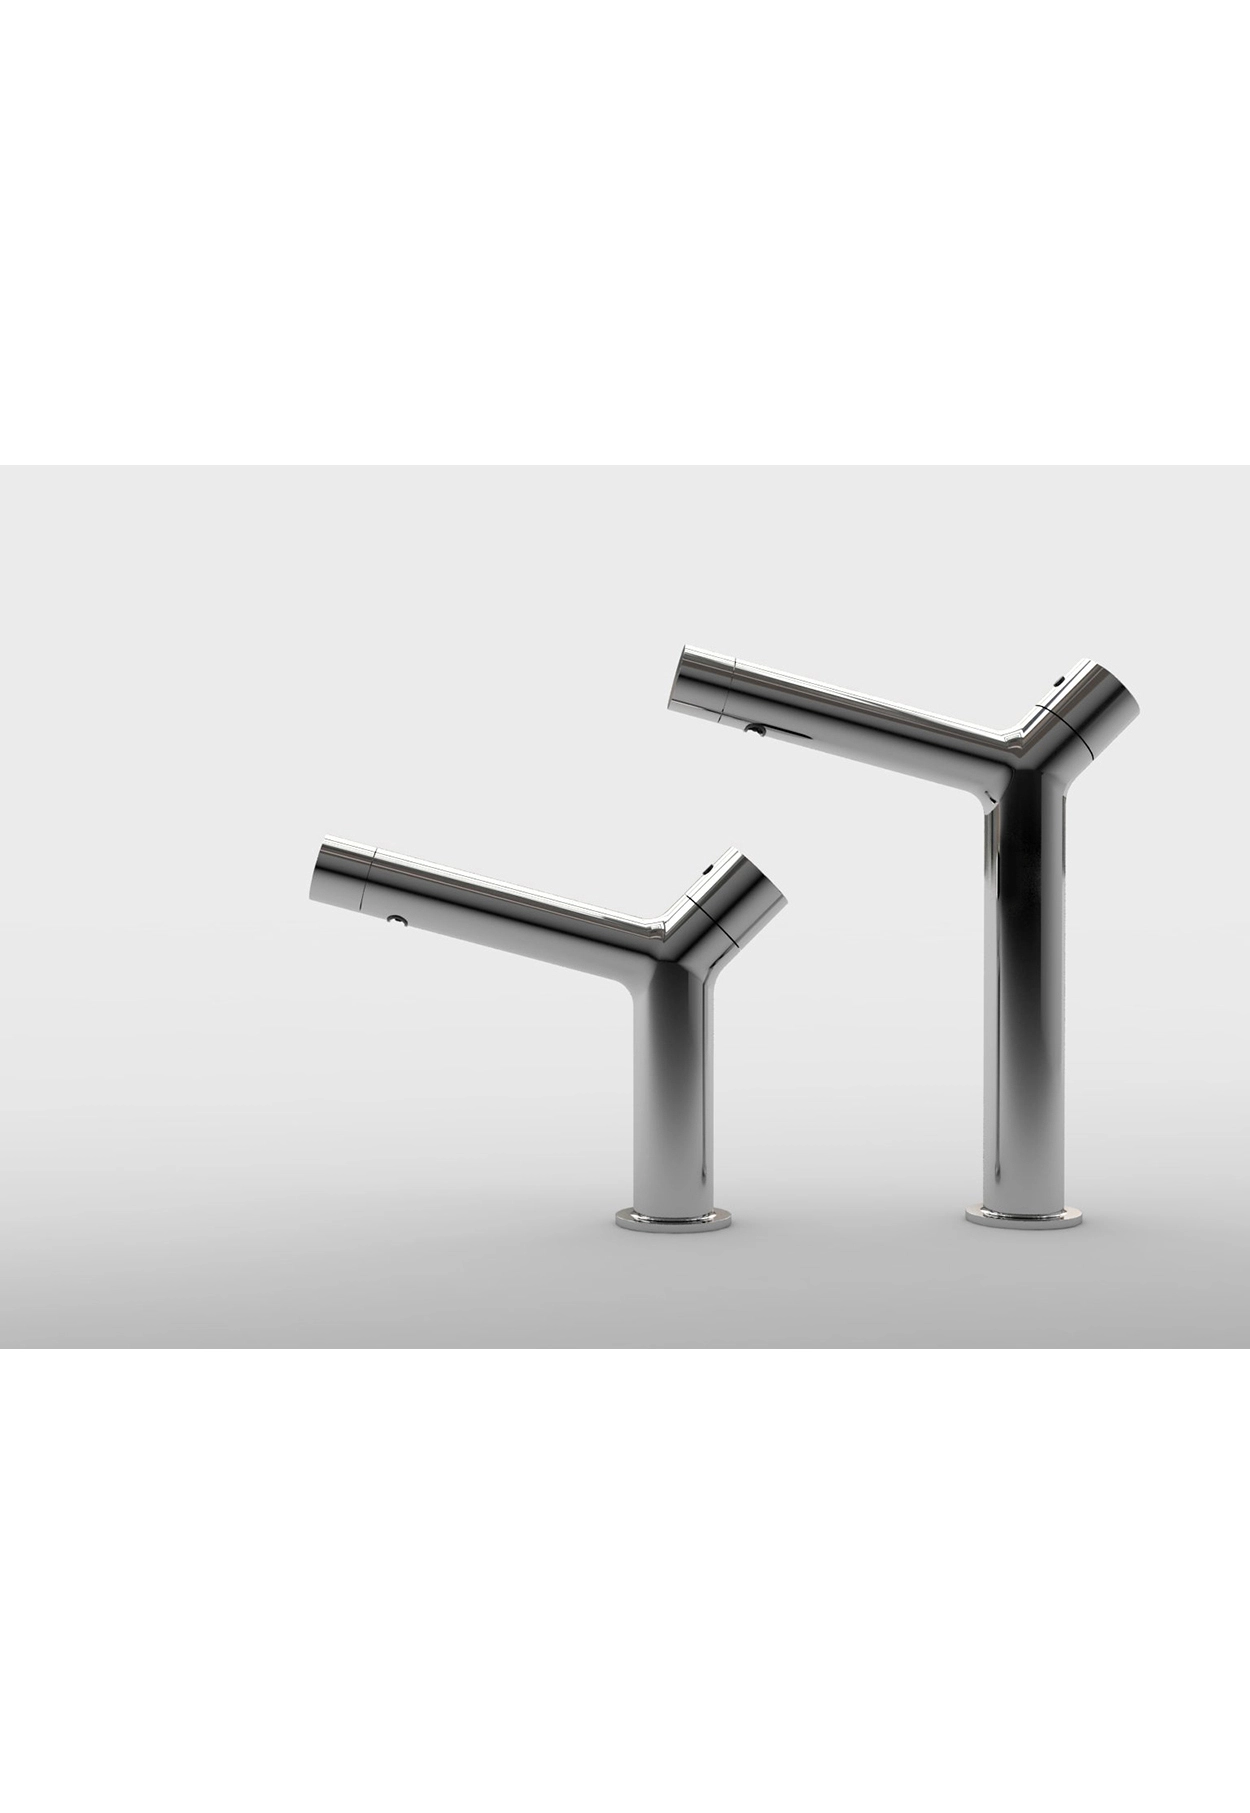 JUSTIME YES Basin Faucets won the Silver Award of 2016 International Design Excellence Award (IDEA)